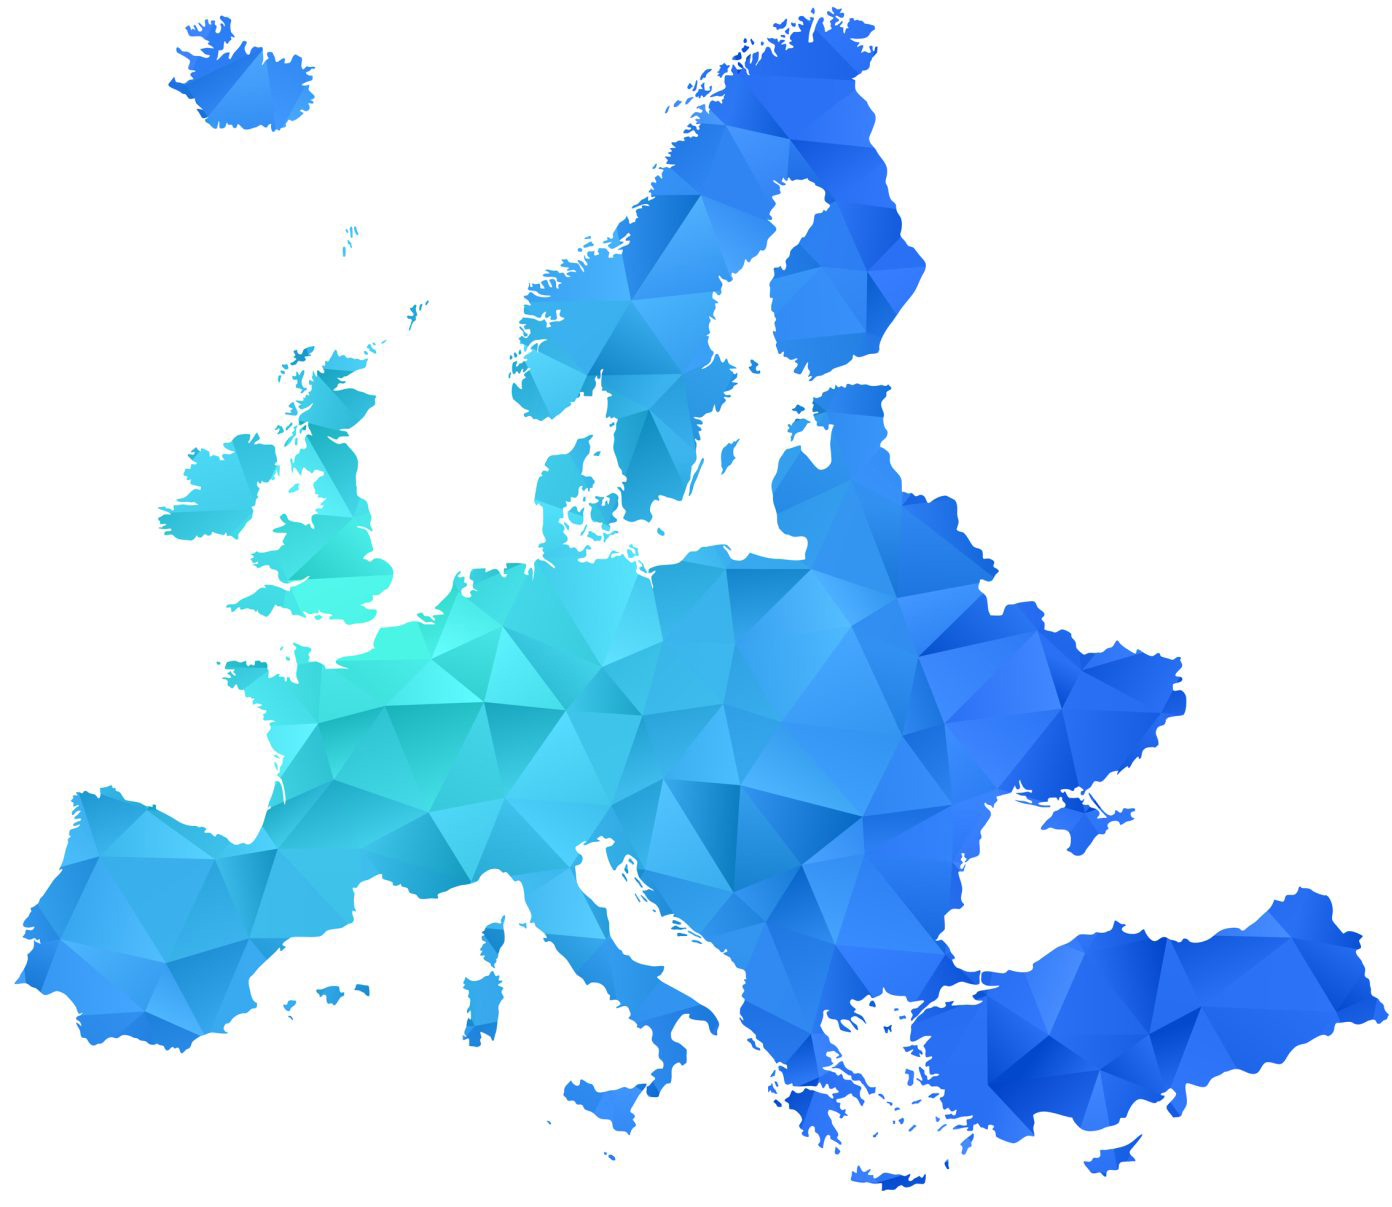 Map from Europe filled with blue triangles